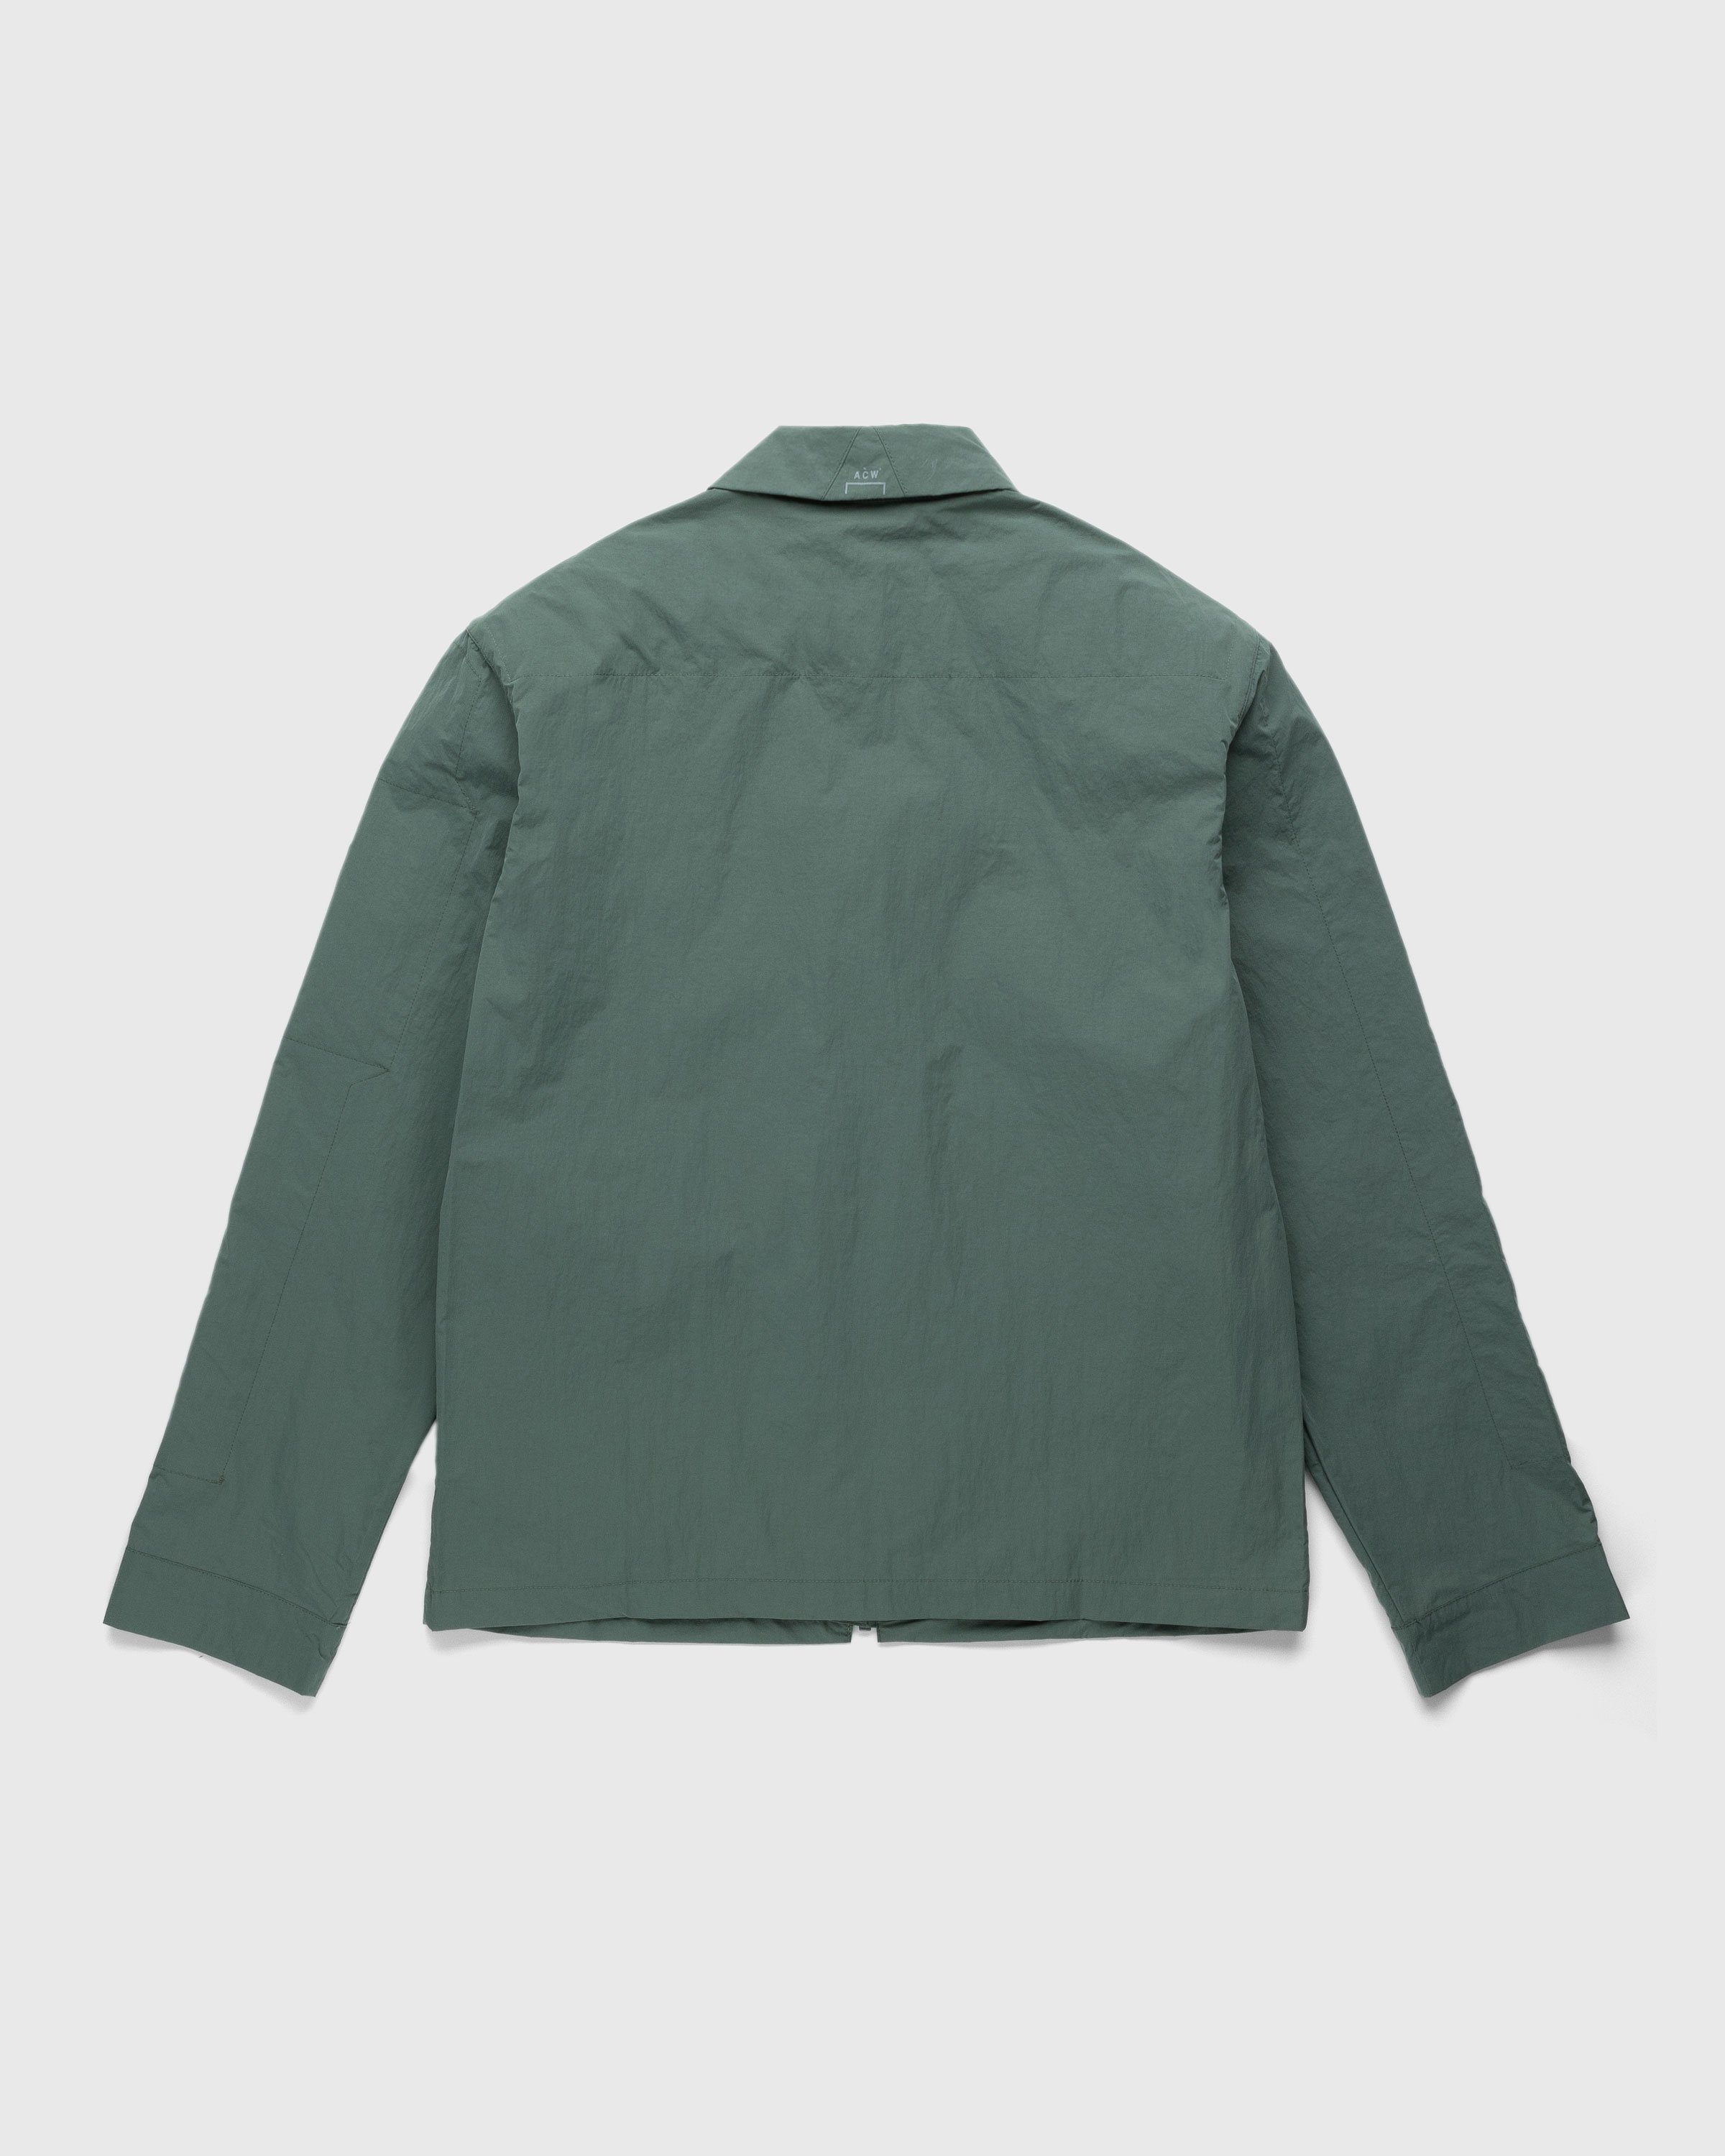 A-Cold-Wall* – Gaussian Overshirt Military Green | Highsnobiety Shop